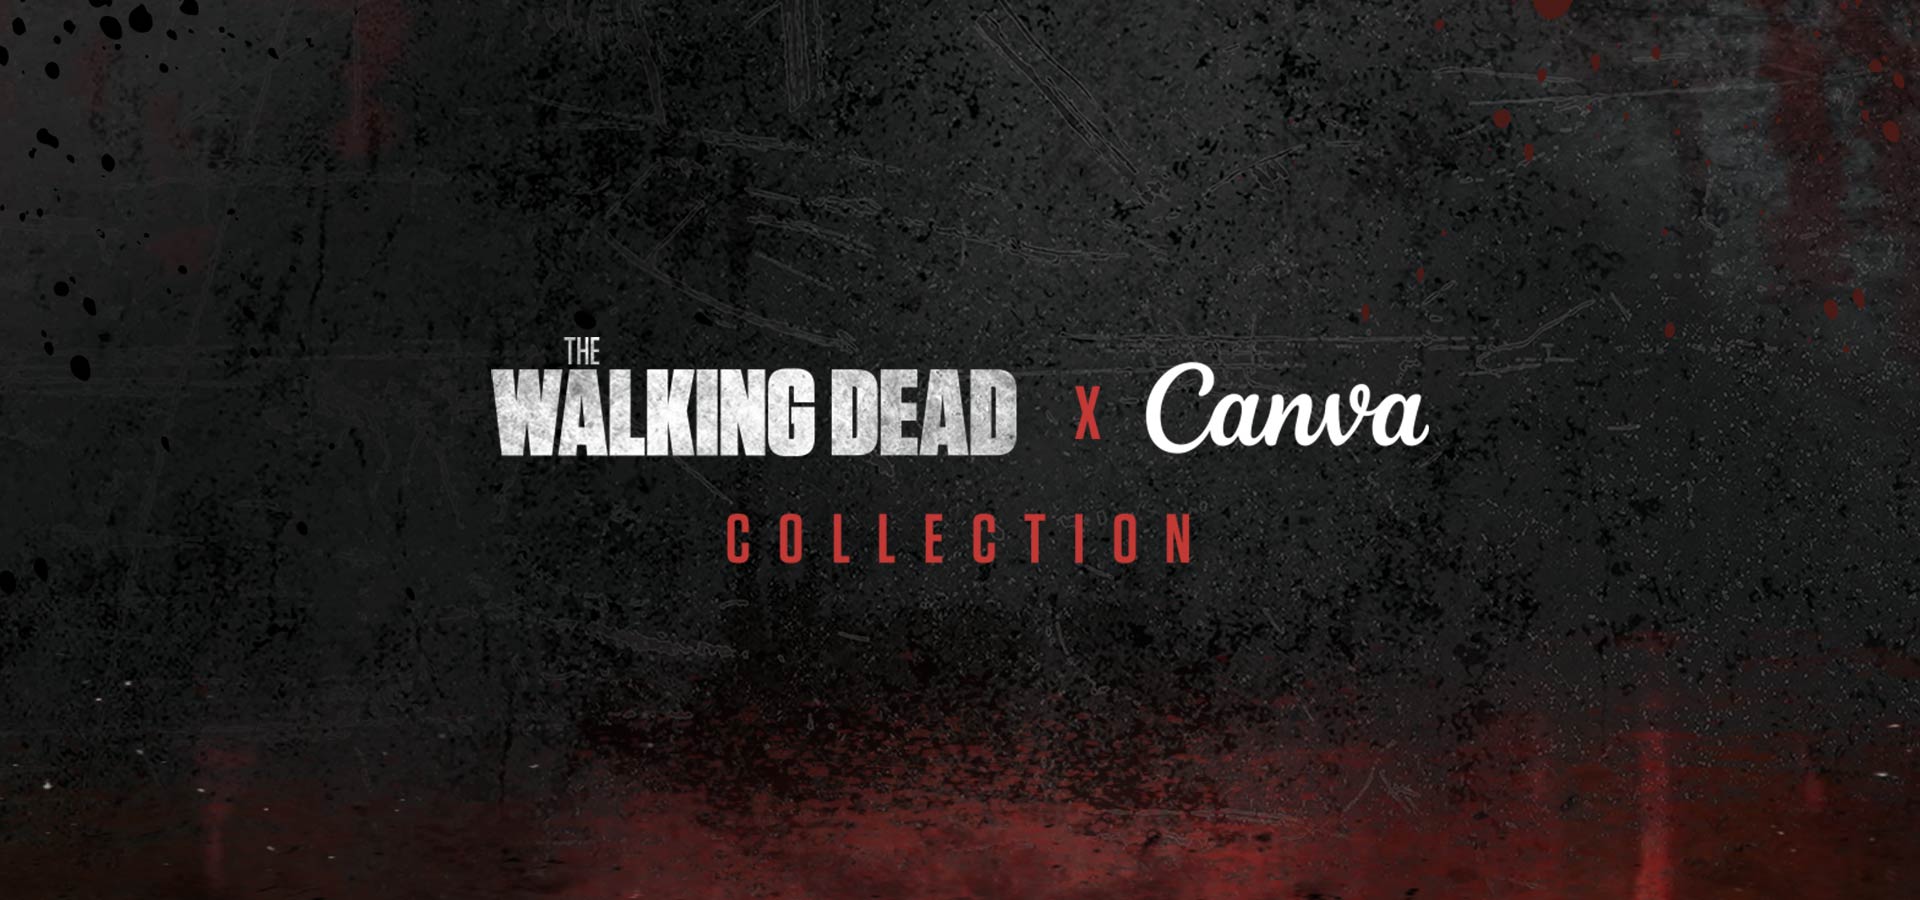 Create Undead Masterpieces With TWD x Canva Collection 